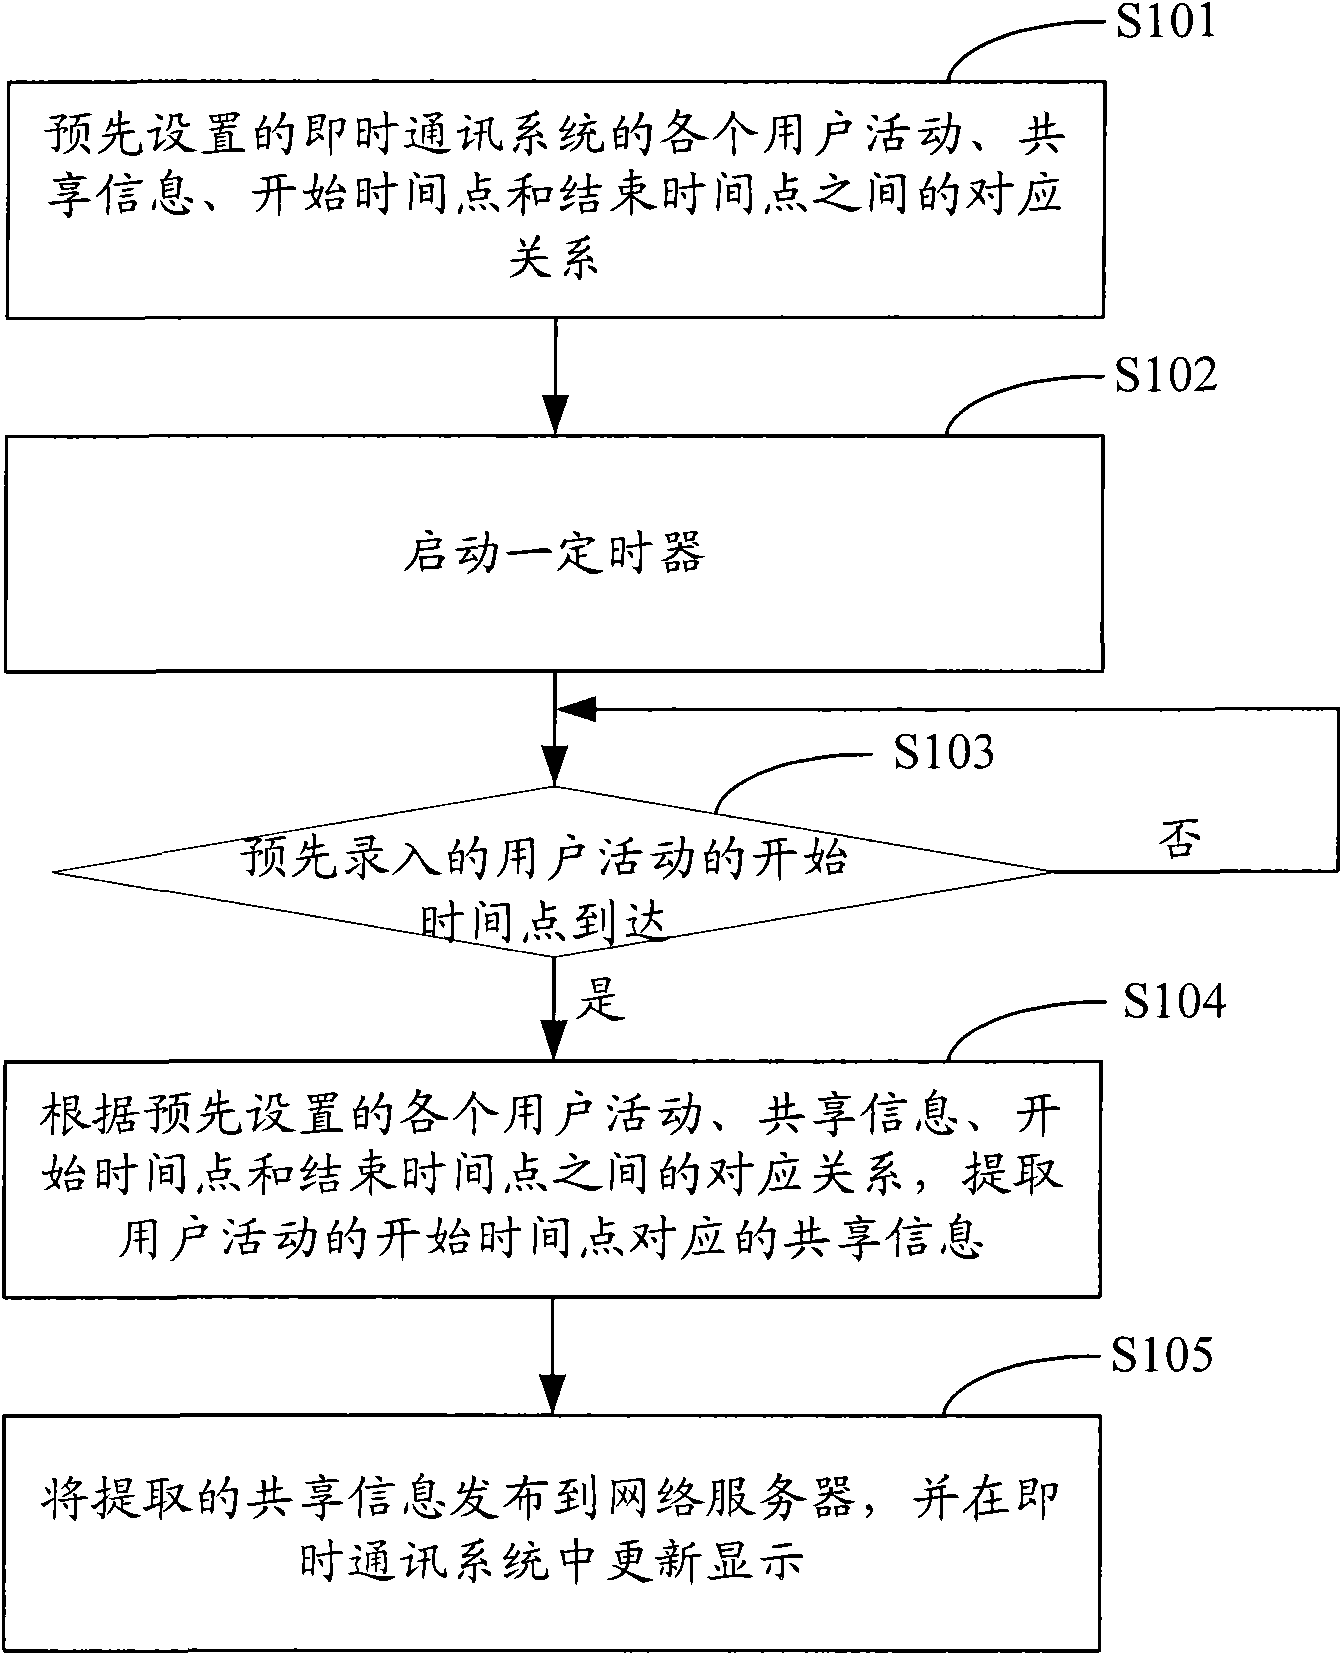 Method and system for releasing shared information in instant communication system